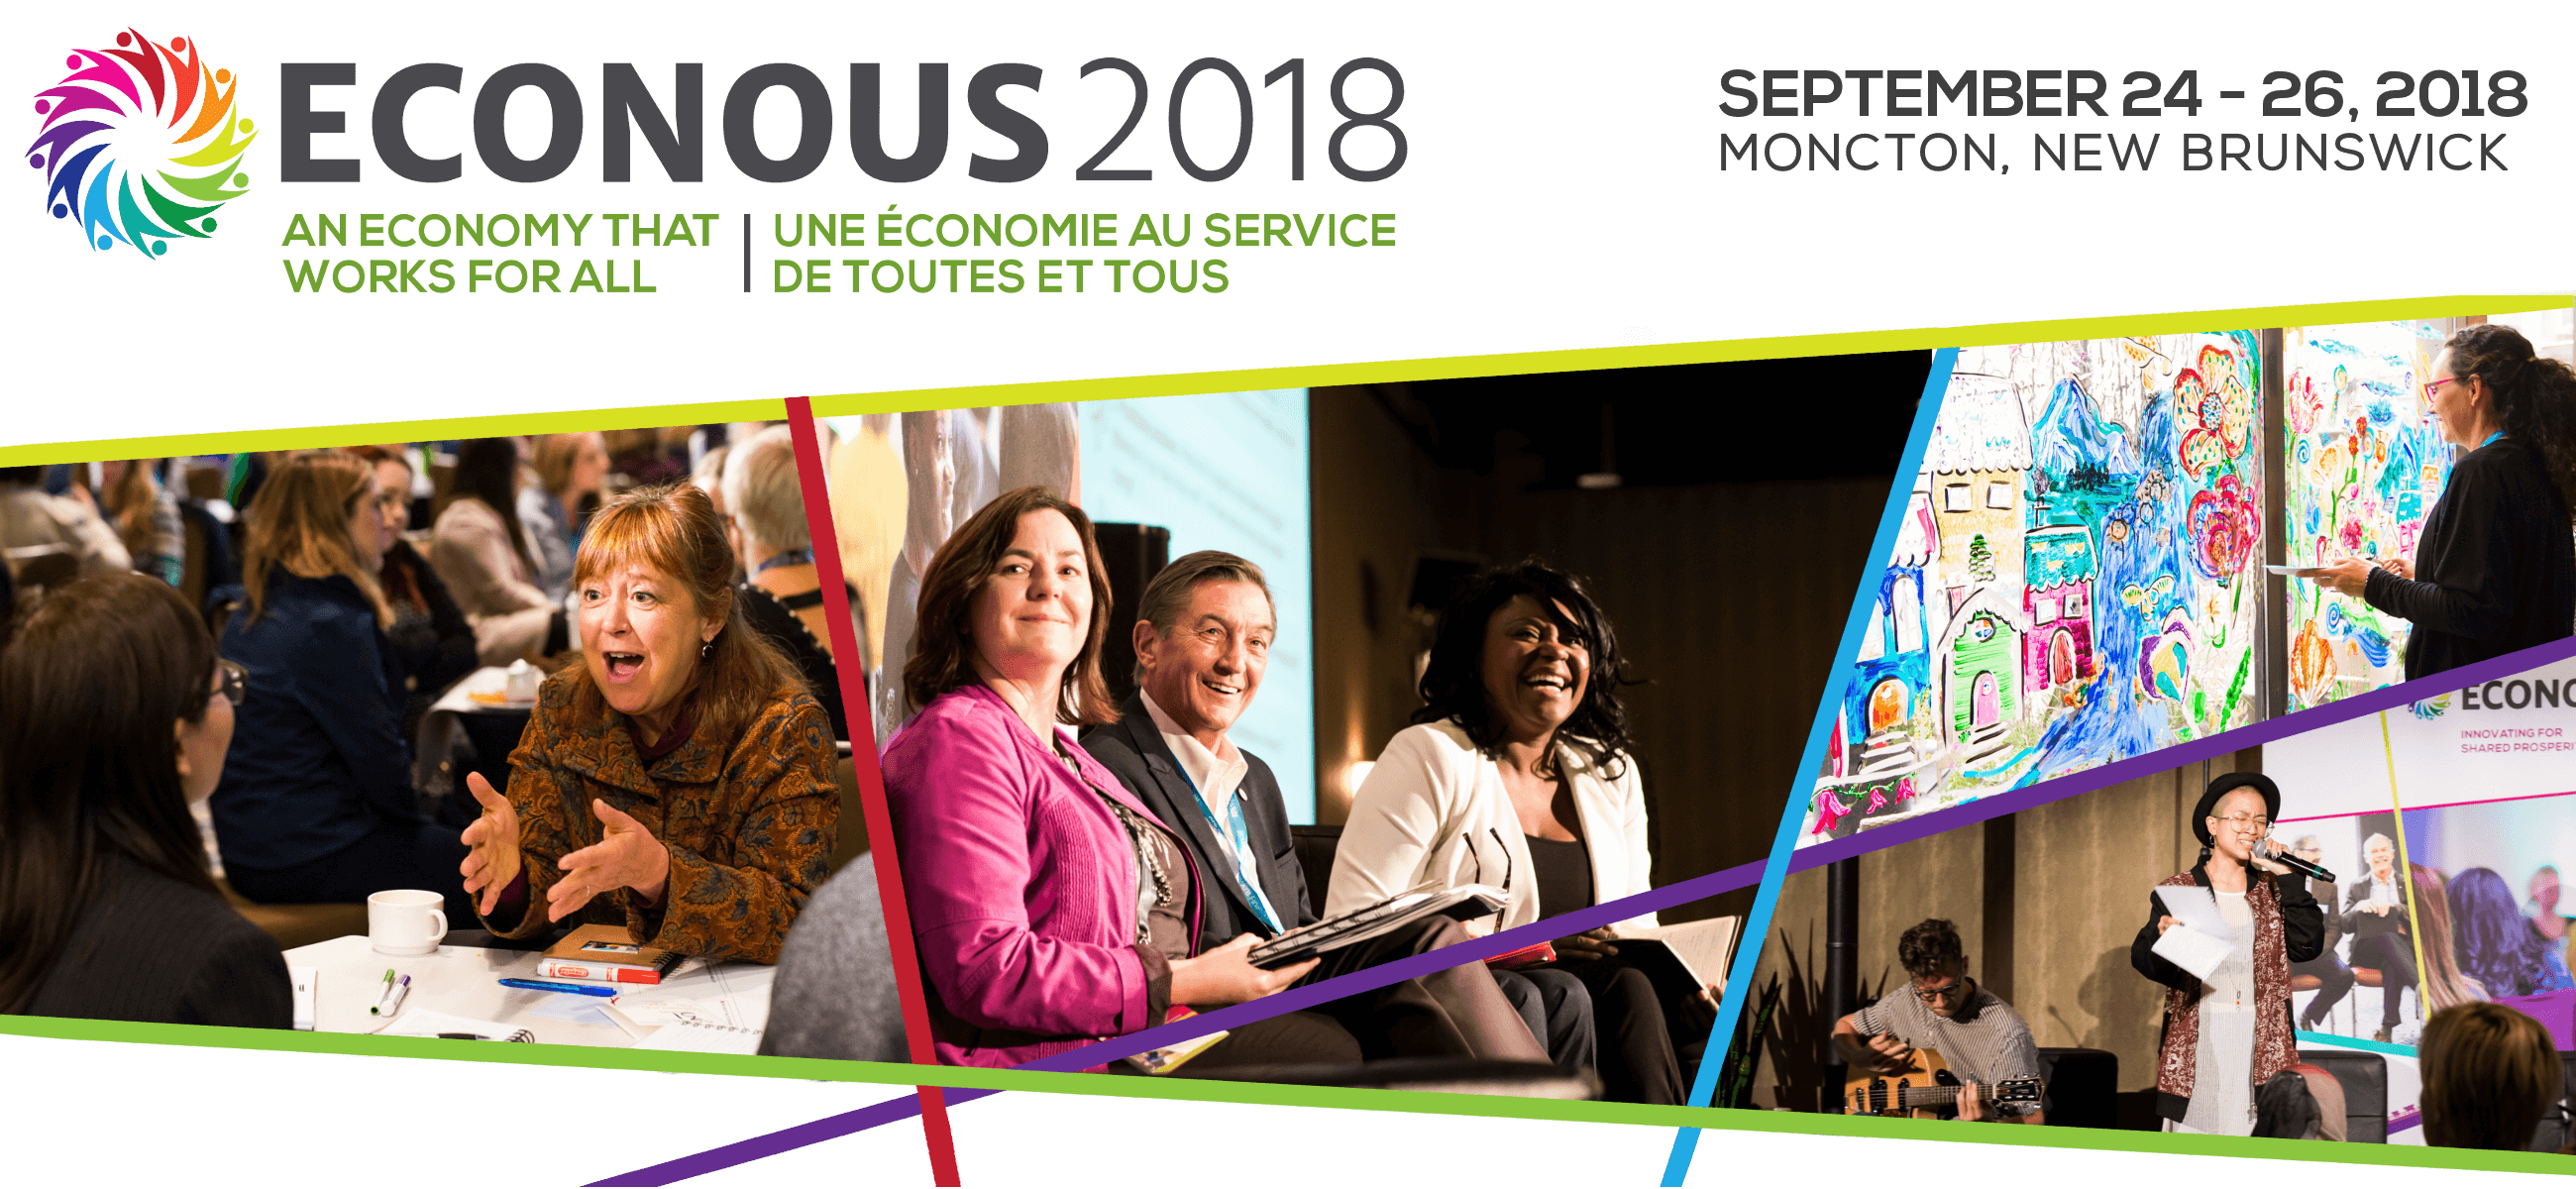 ECONOUS2018: An Economy that Works for All (September 24-26, 2017, Moncton, NB)